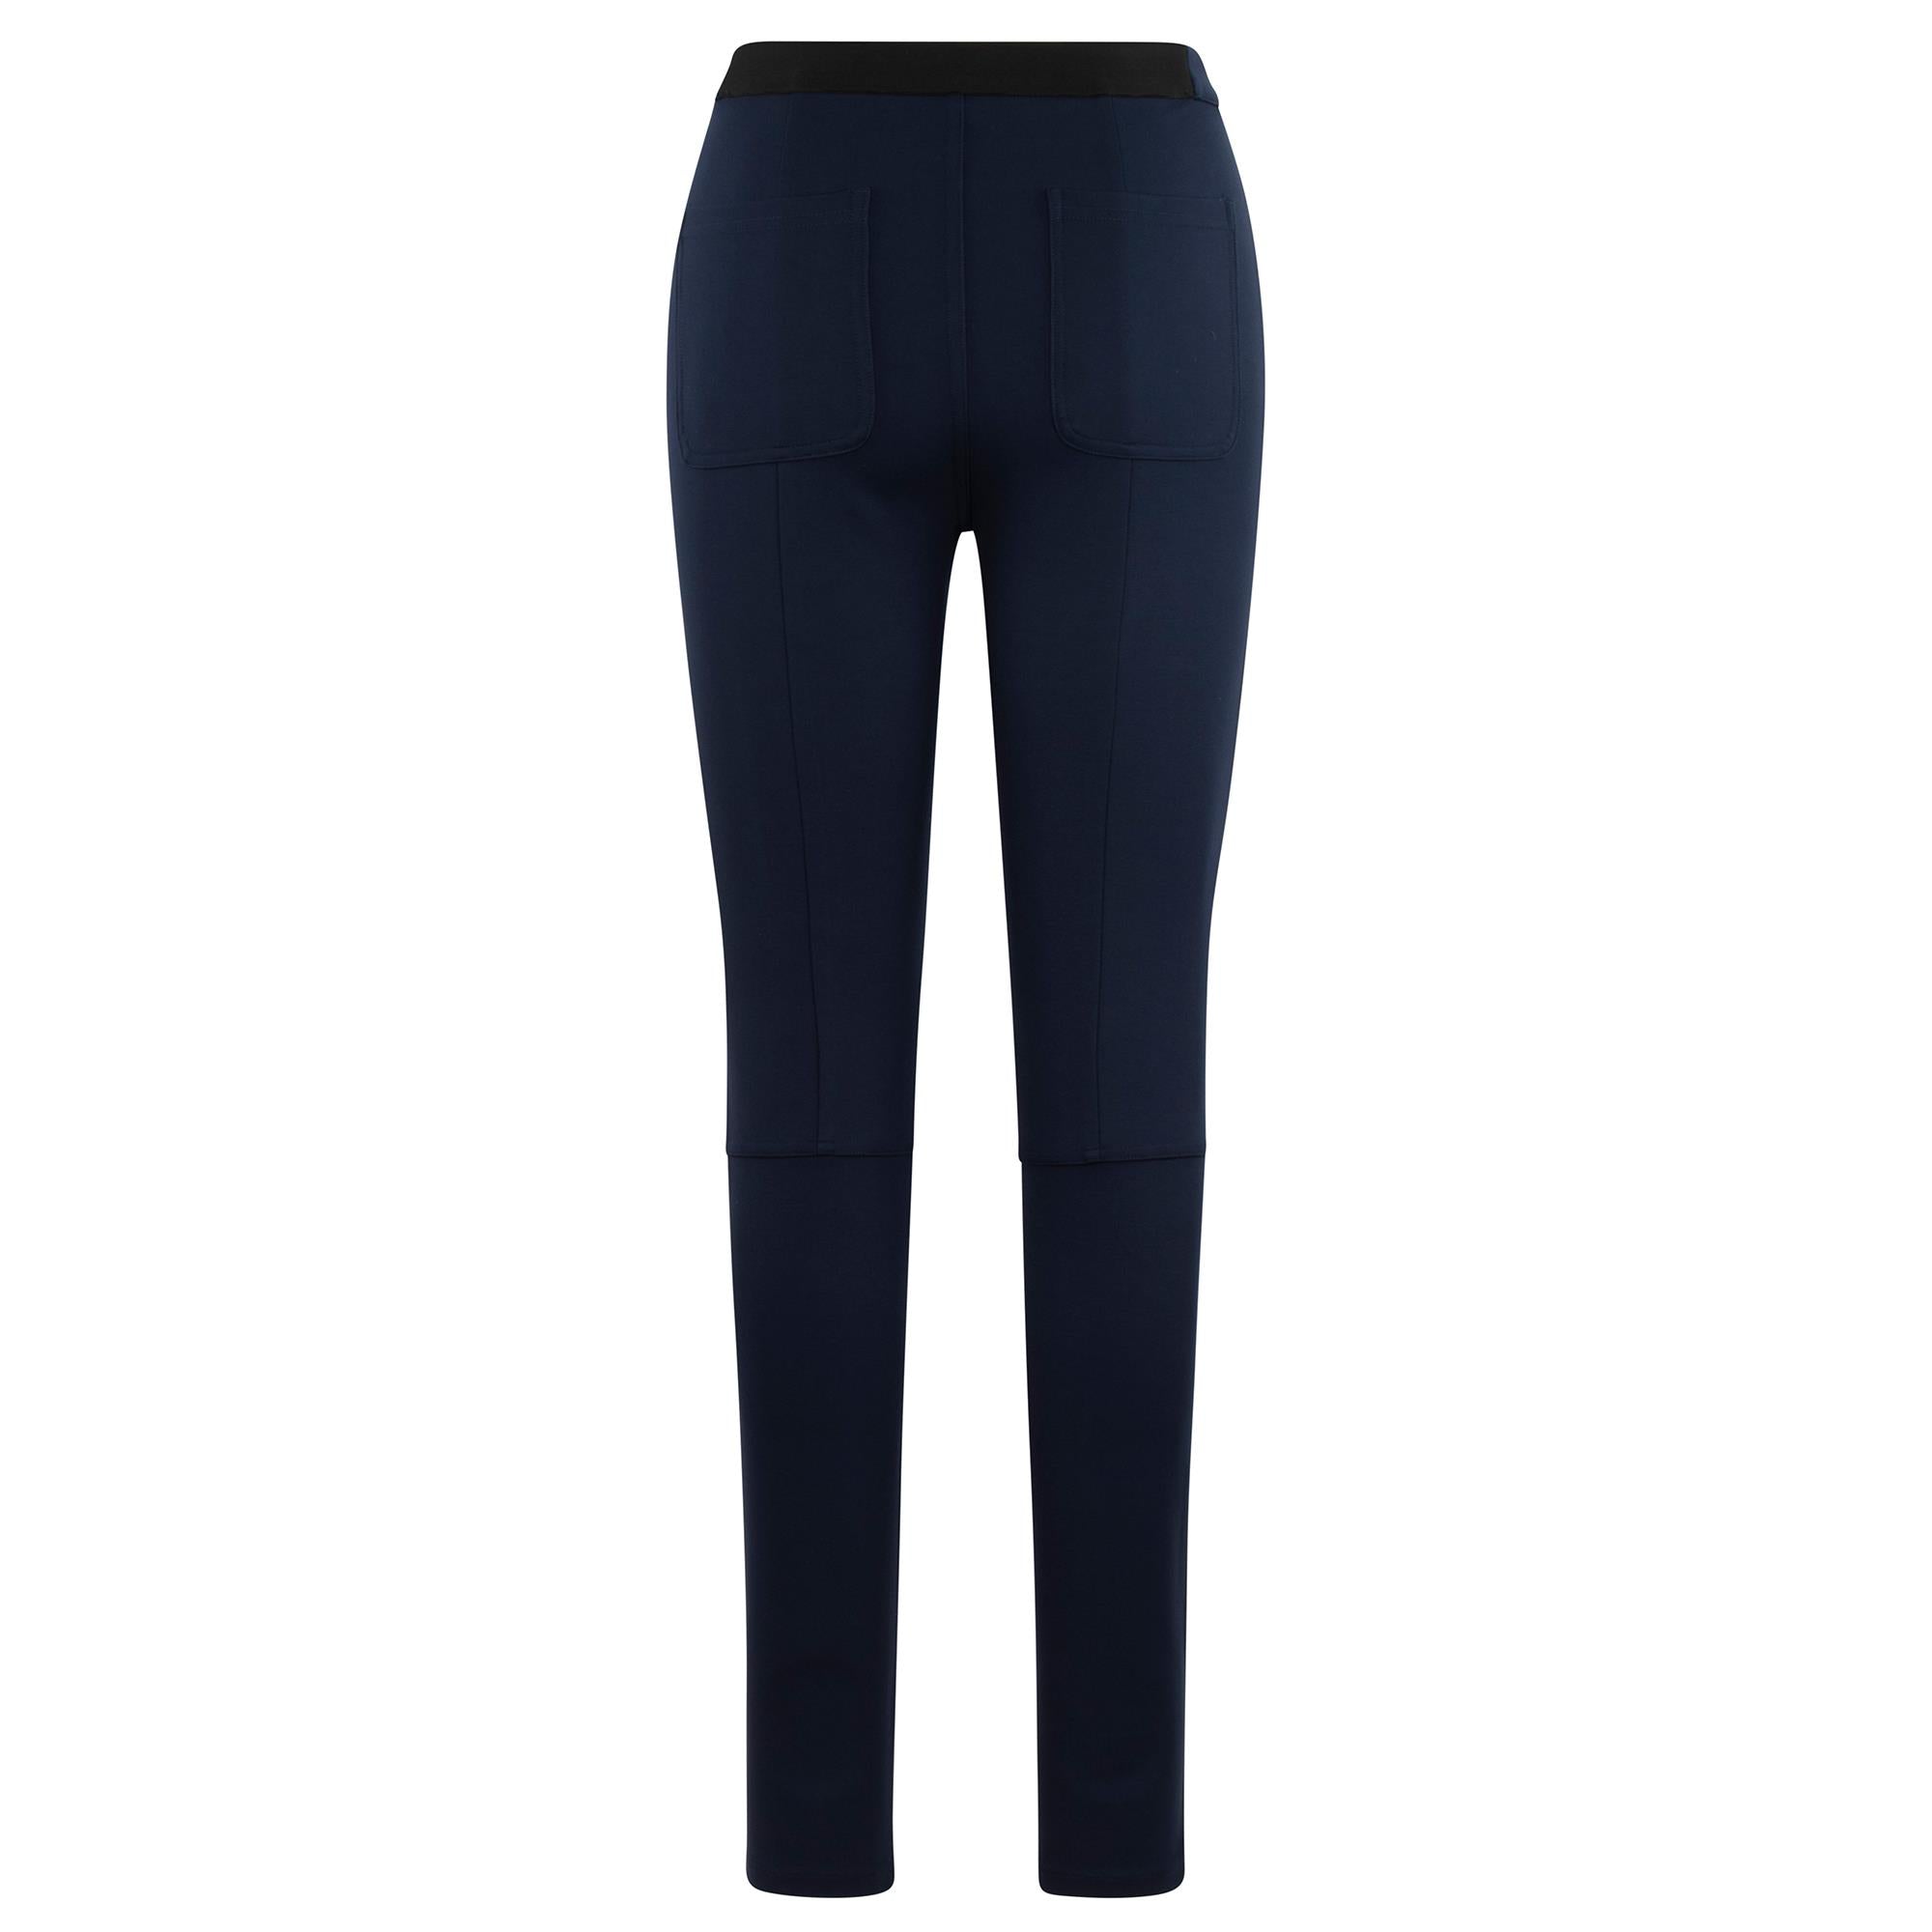 Navy blue, moto leggings with no front or back pockets. 68% cotton